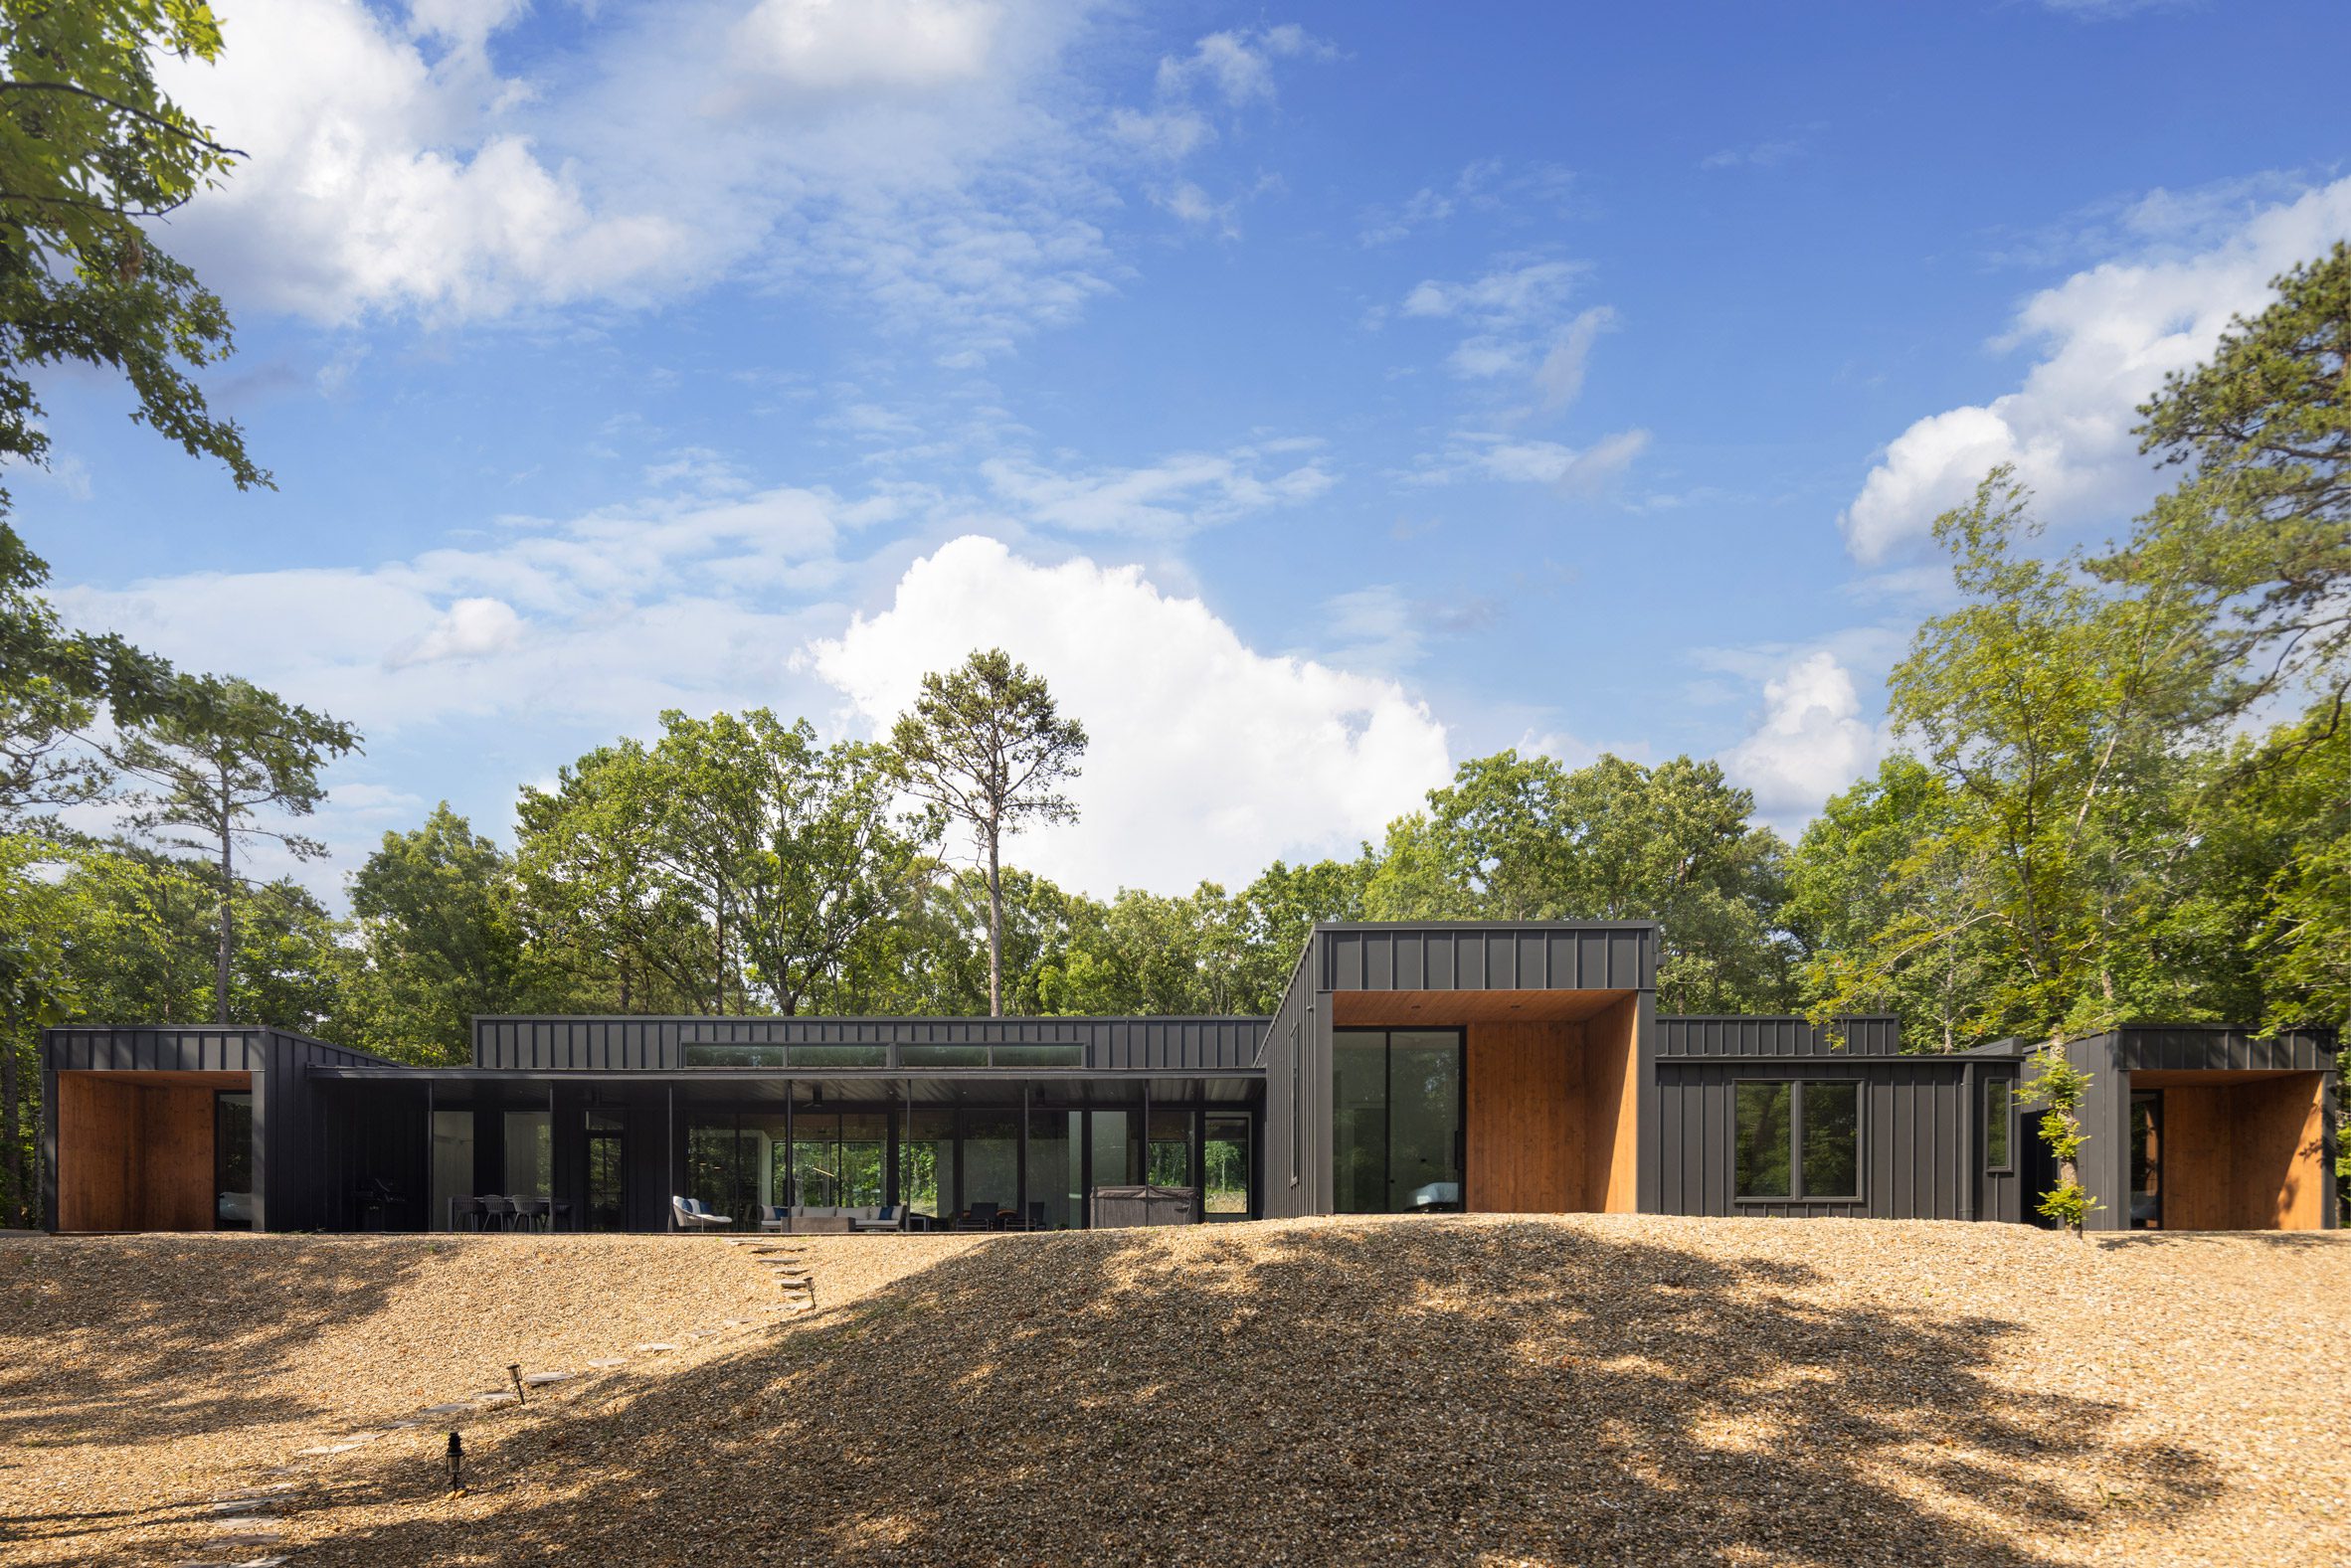 External frontage of Oklahoma cabin by Far + Dang